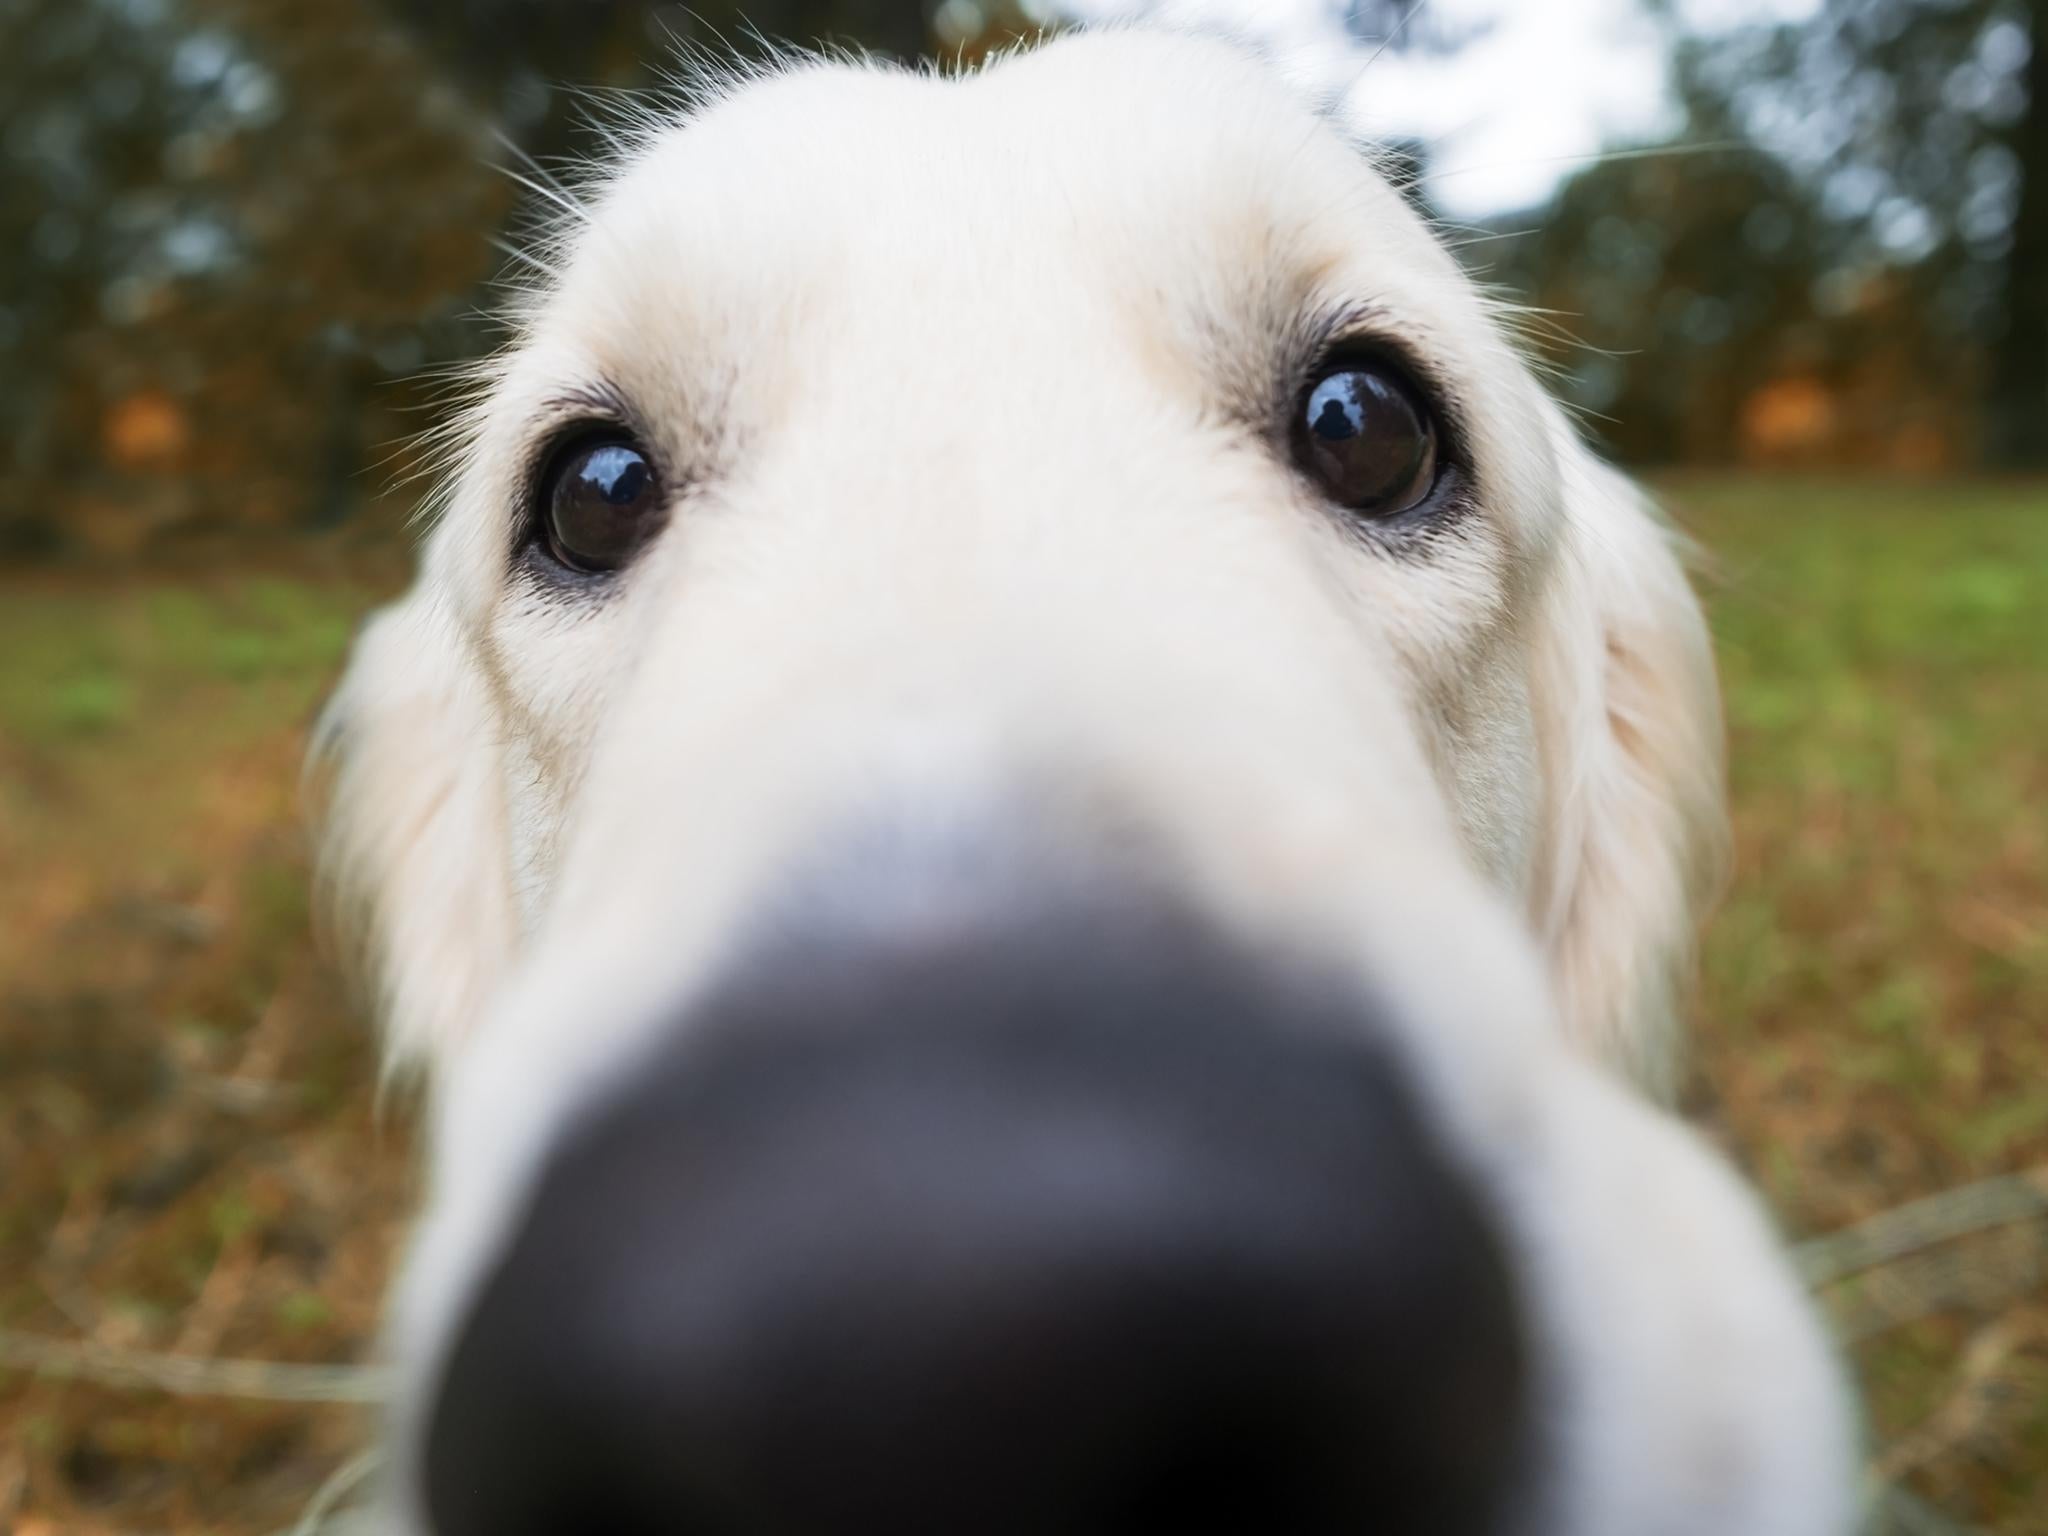 Dogs' powerful noses can detect the bacteria that causes citrus greening